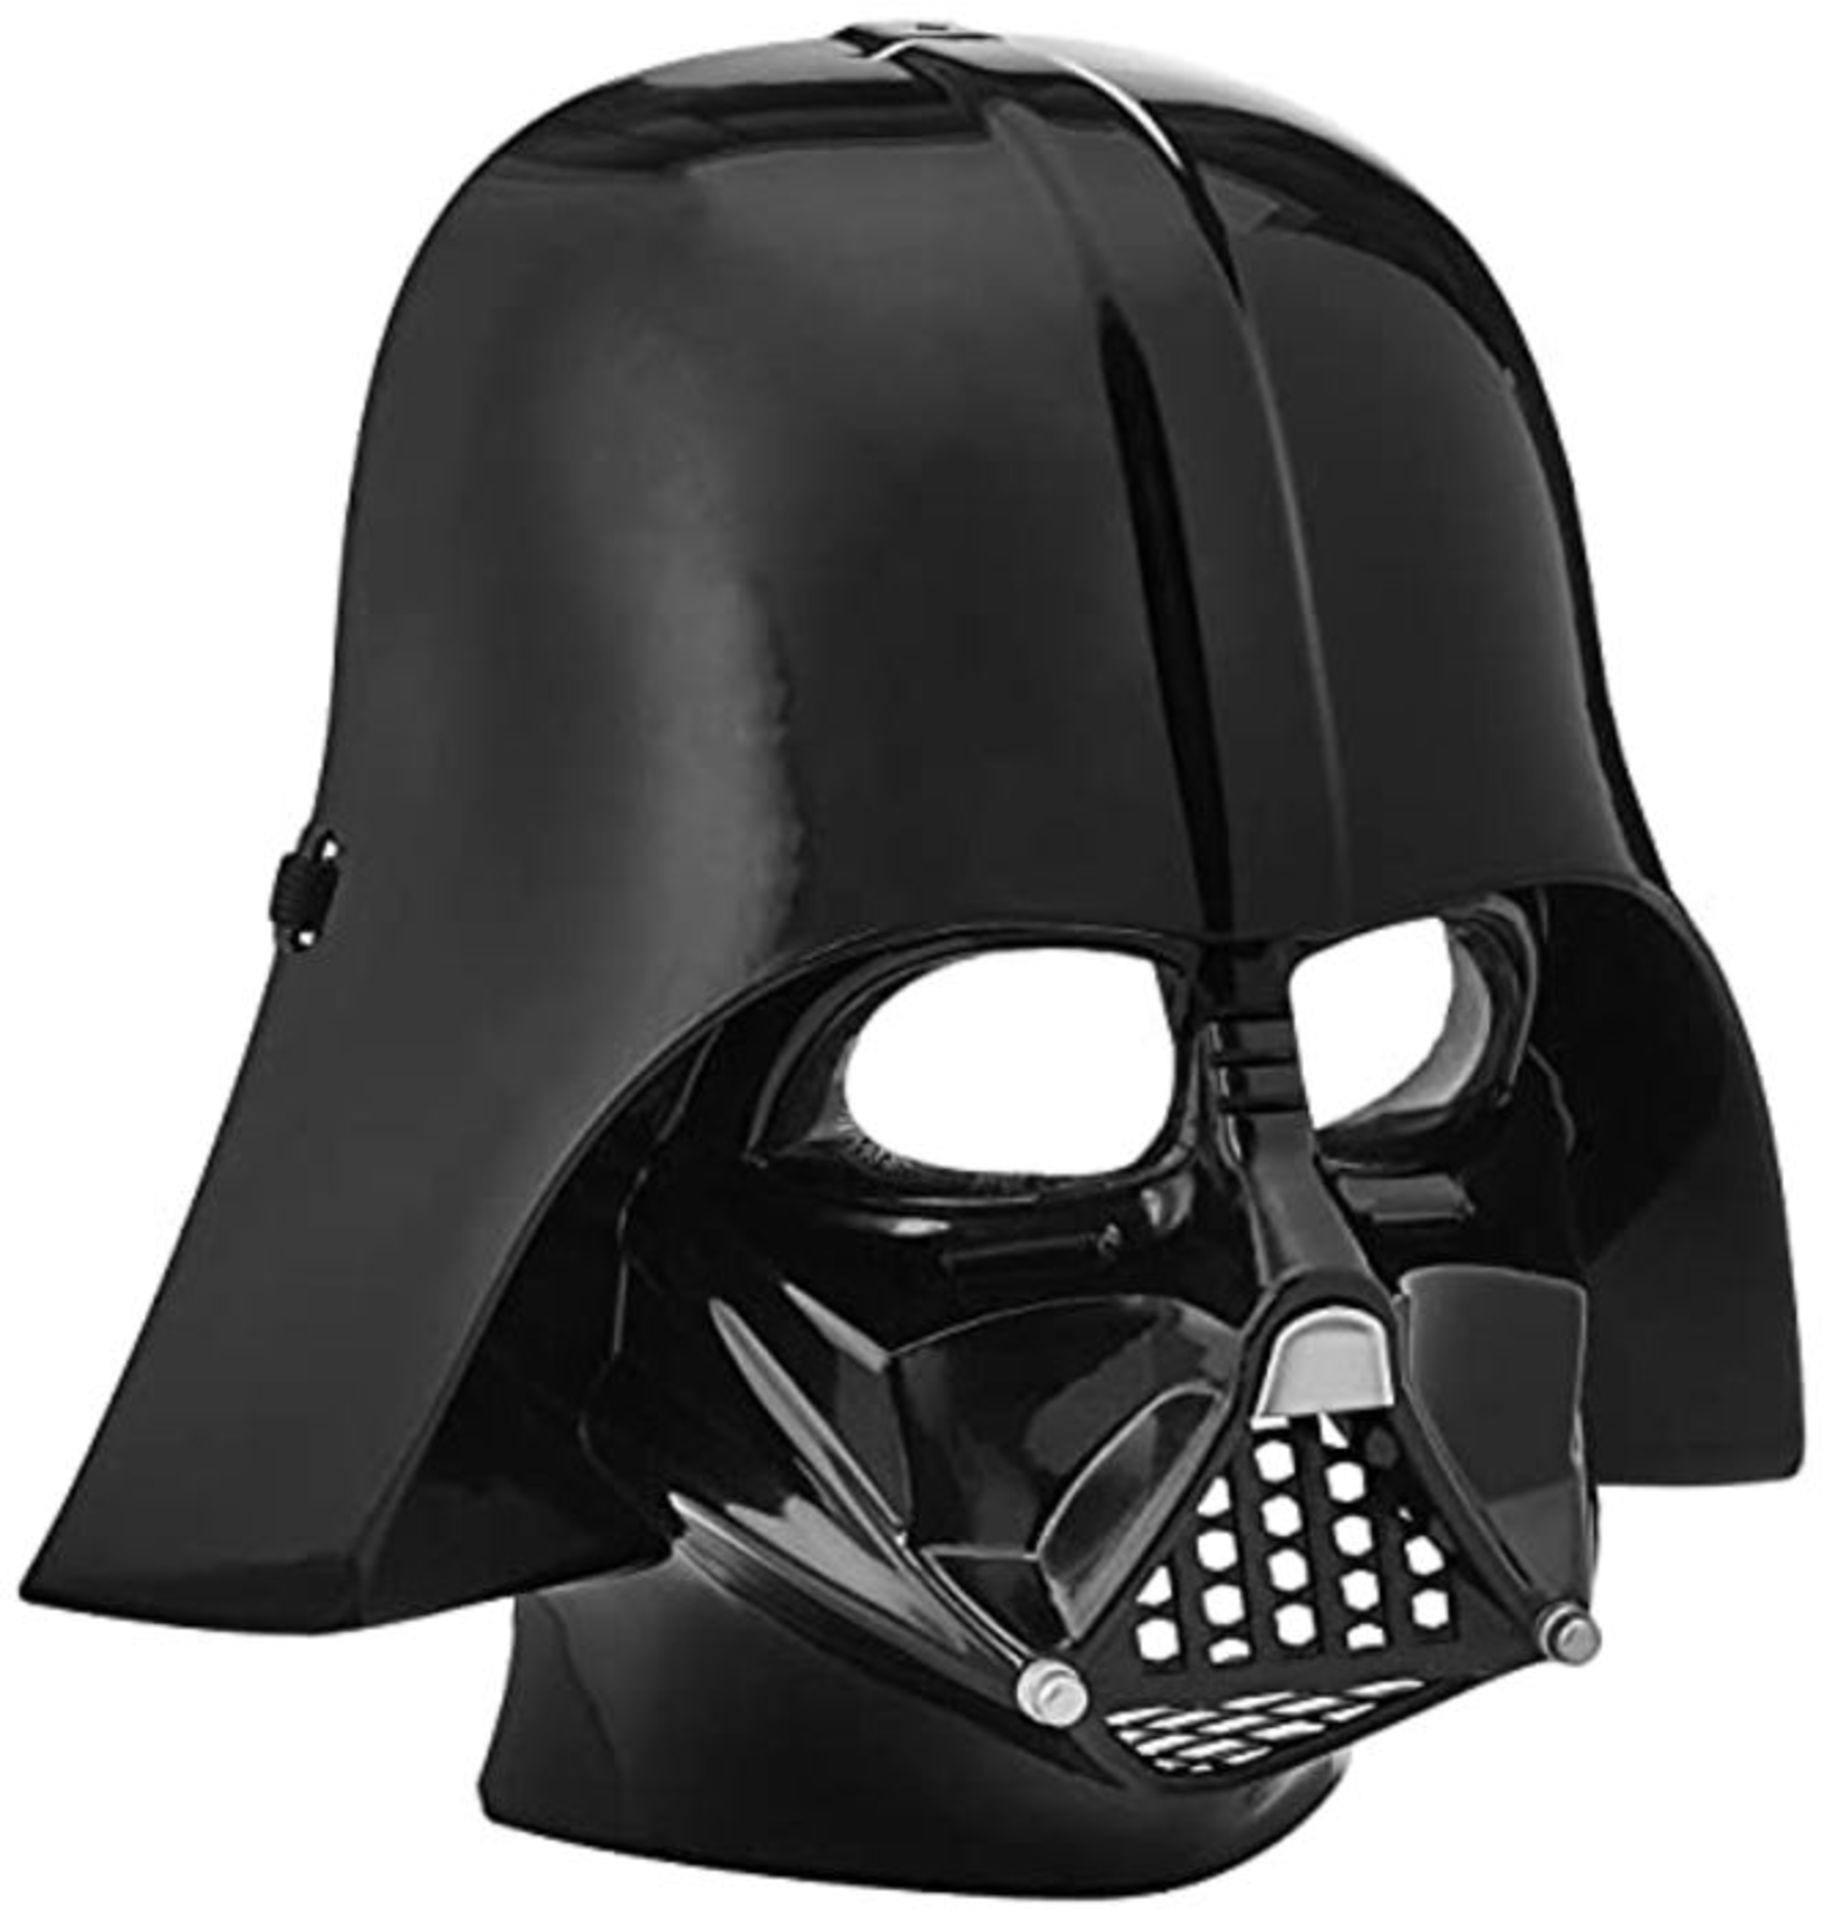 Rubie's Official Child's Disney Star Wars Darth Vader Mask Costume - One Size